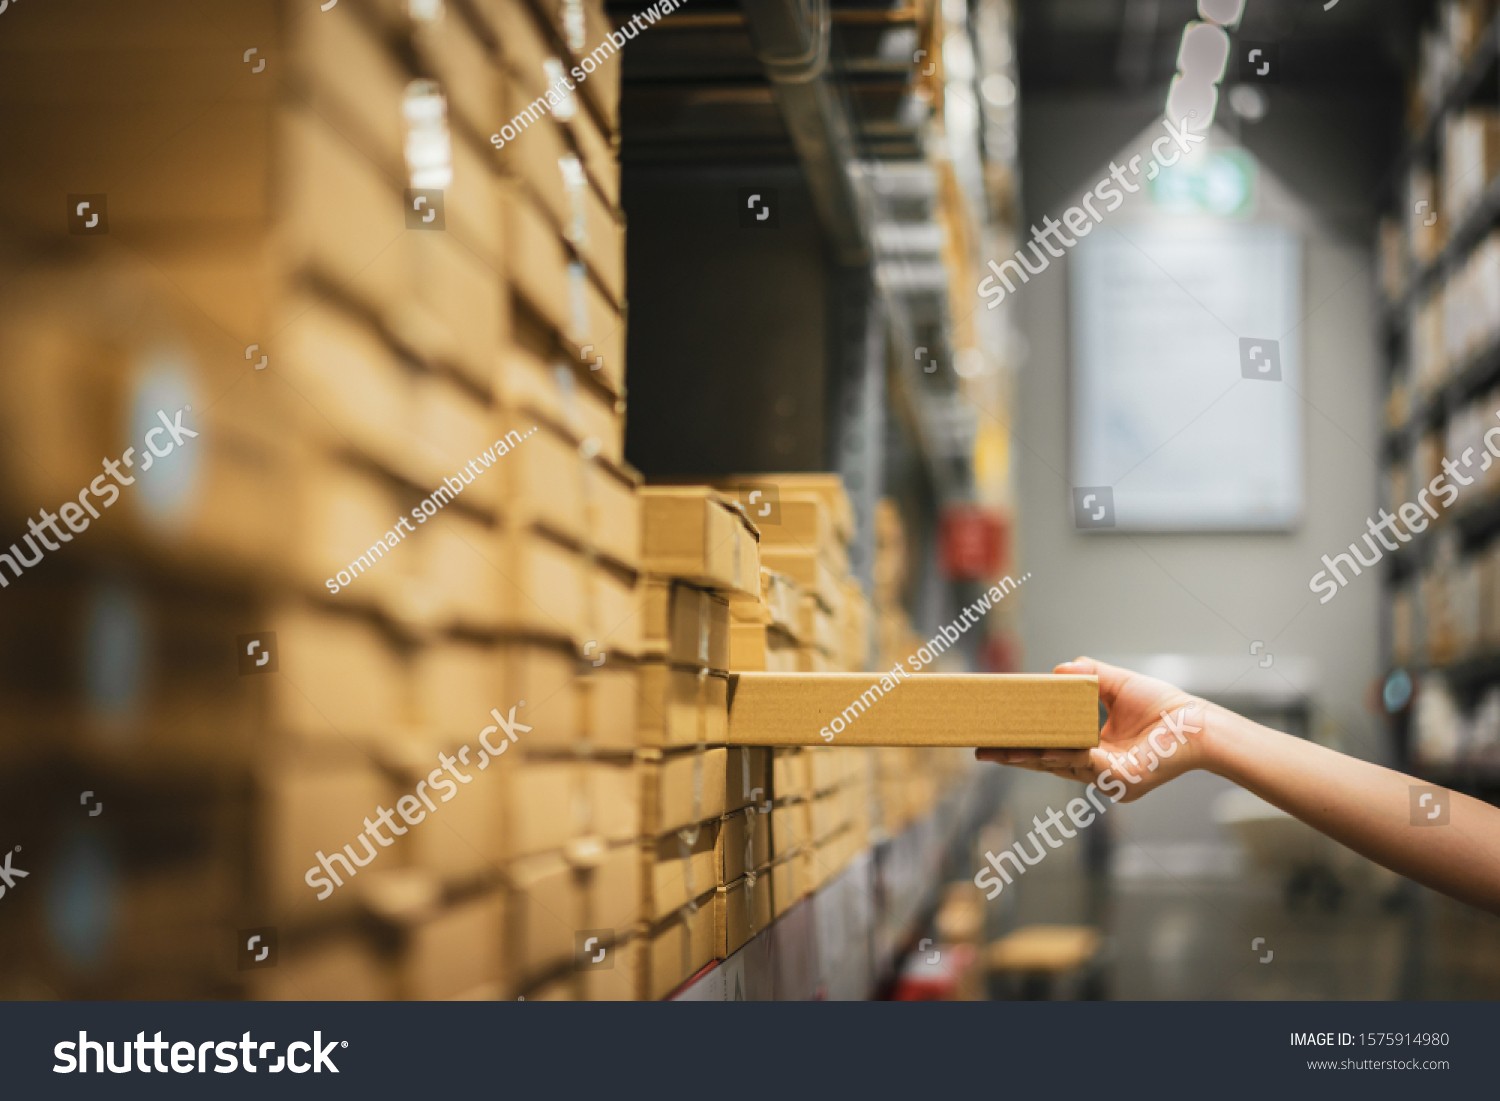 Cardboard box package with blur hand of Asian shopper woman picking product from shelf in warehouse. customer shopping lifestyle in department store or purchasing factory good concepts. #1575914980